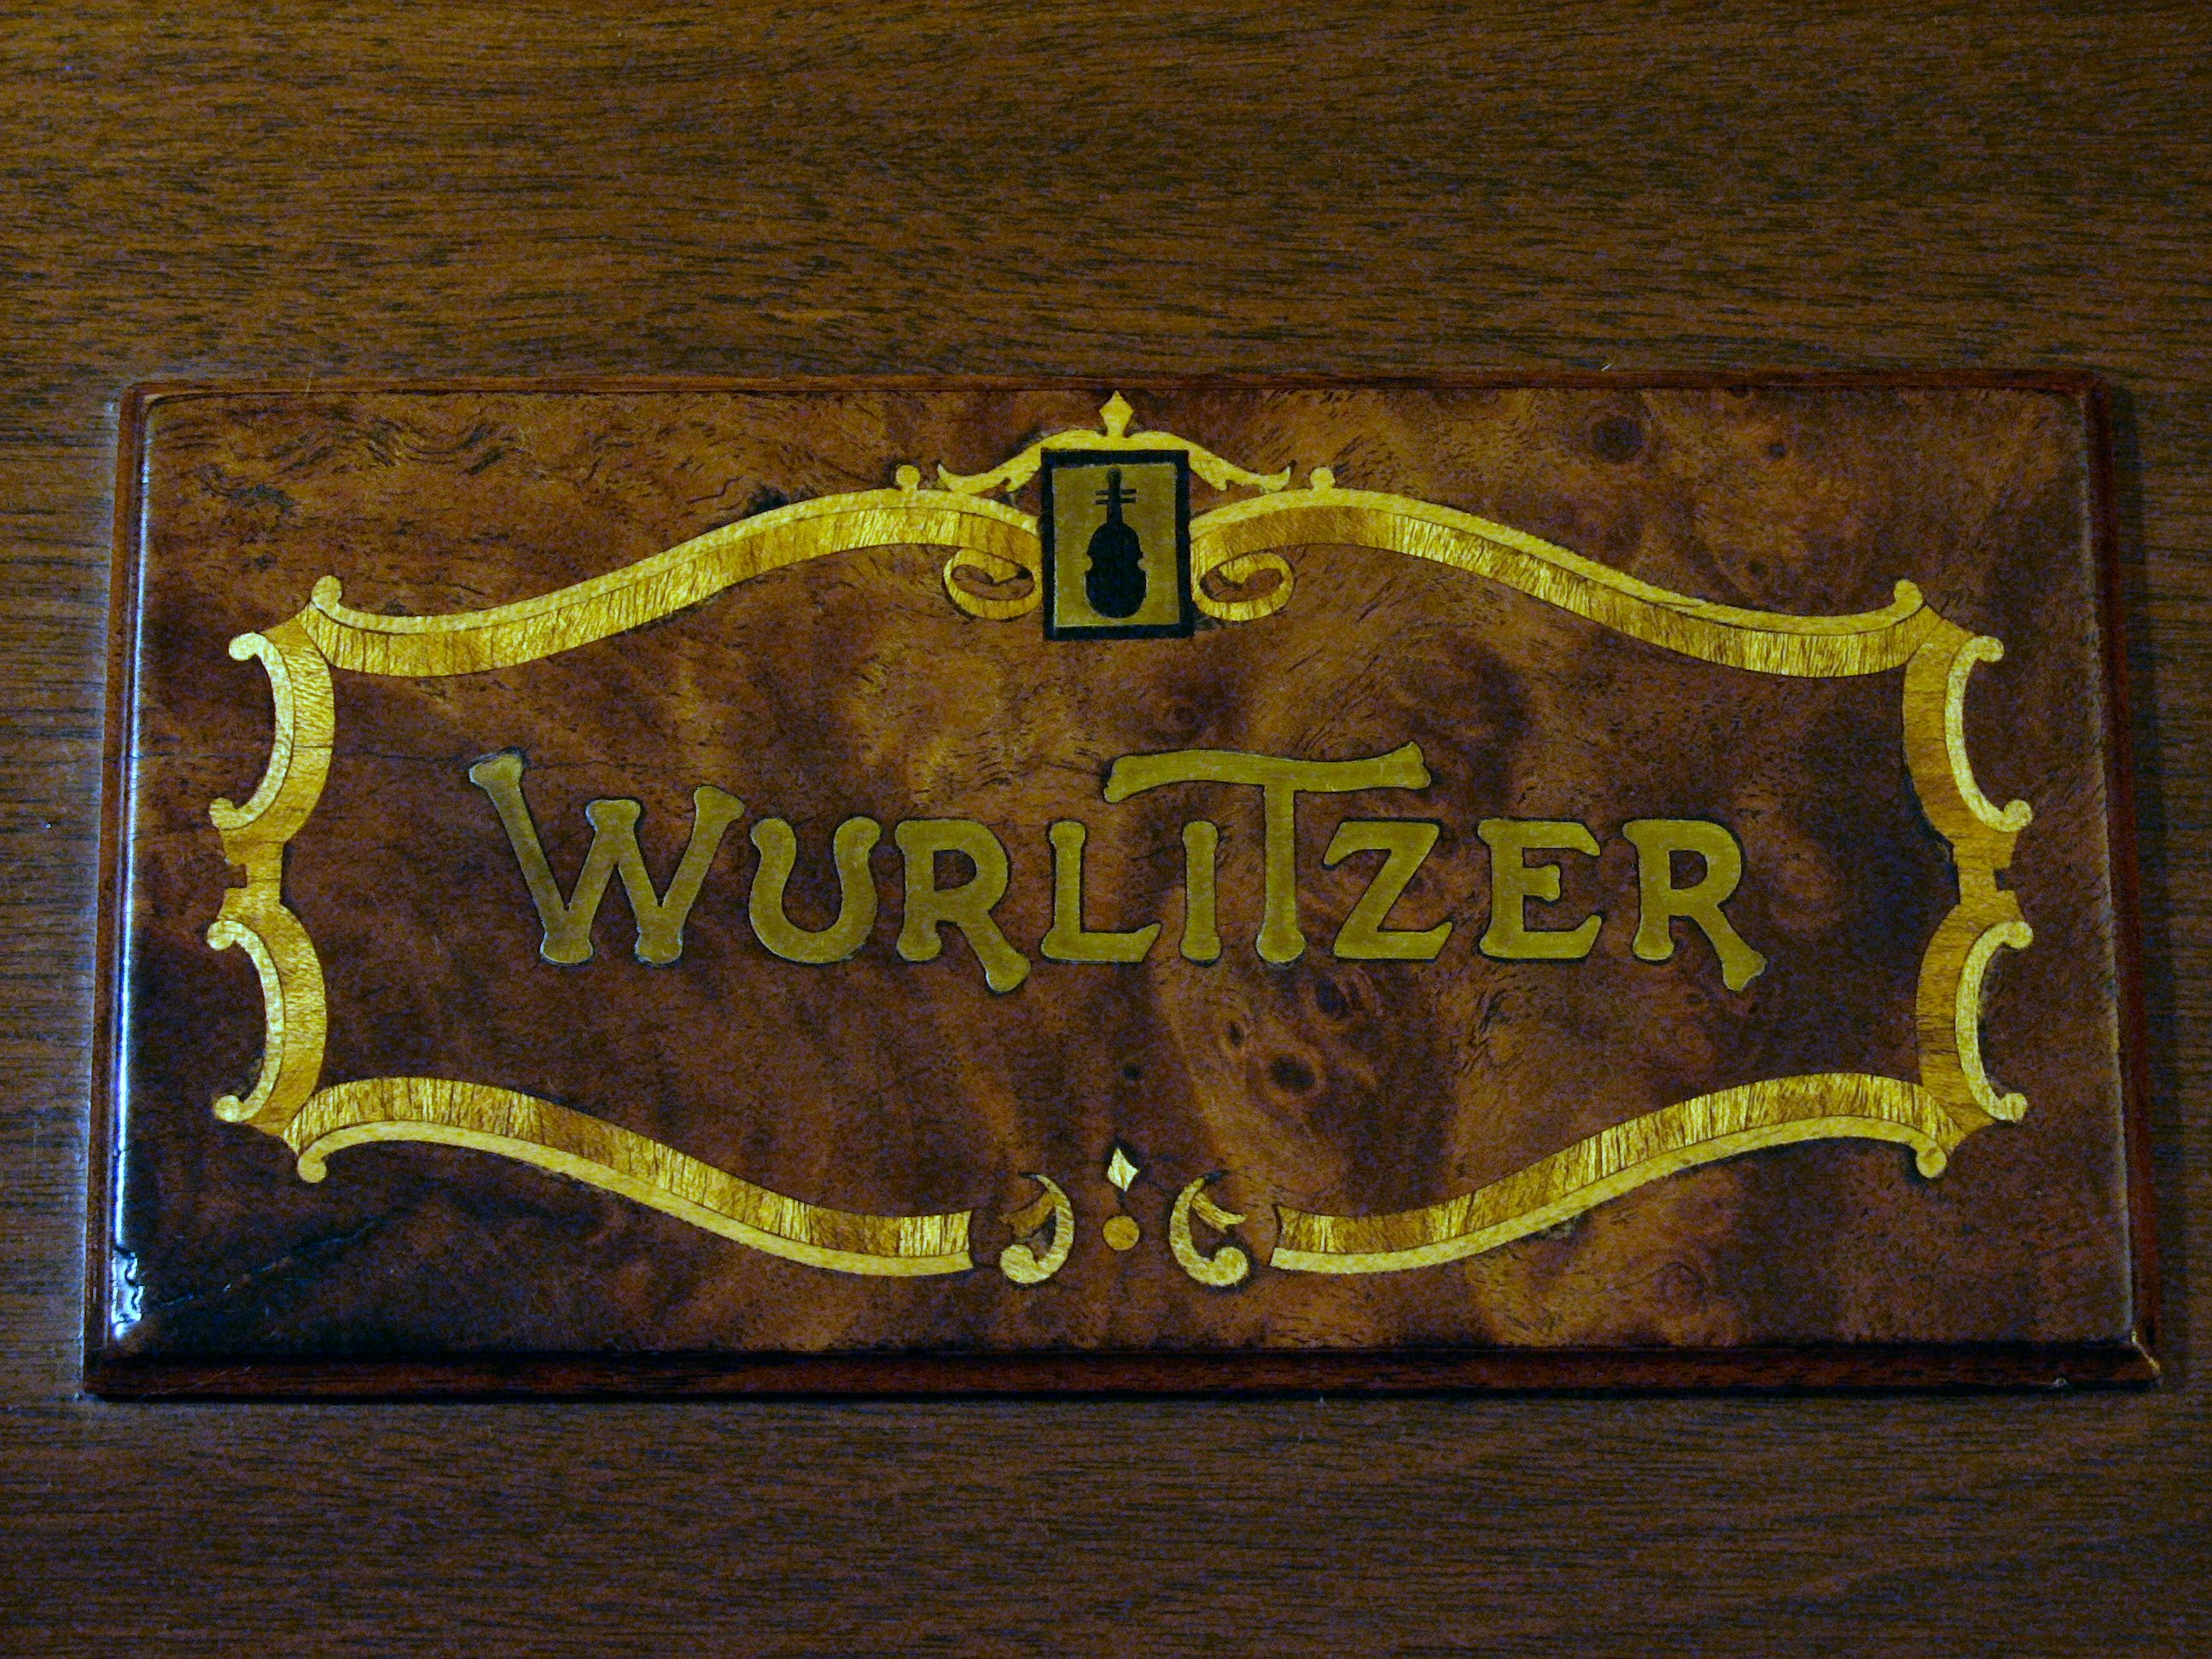 Click here to download a 2592 x 1944 JPG image showing one of the two WurliTzer badges.